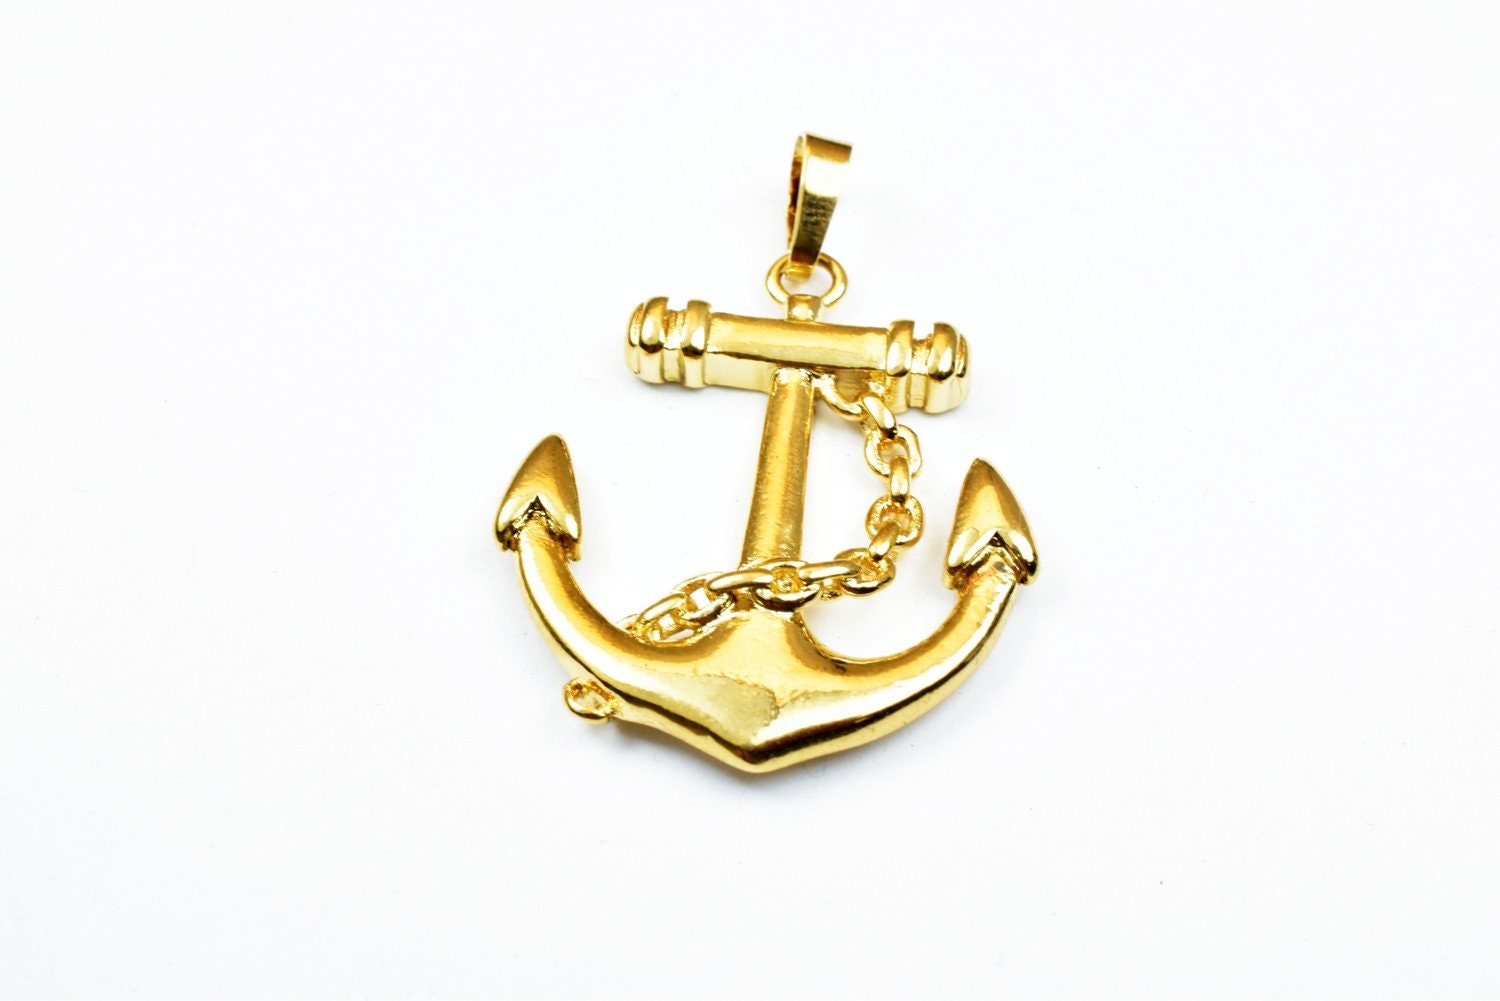 18K as Gold Filled tarnish resistant Anchor Pendant Charm Size 34.5x29mm as Gold Filled tarnish resistant Pendant For Jewelry Making GP137